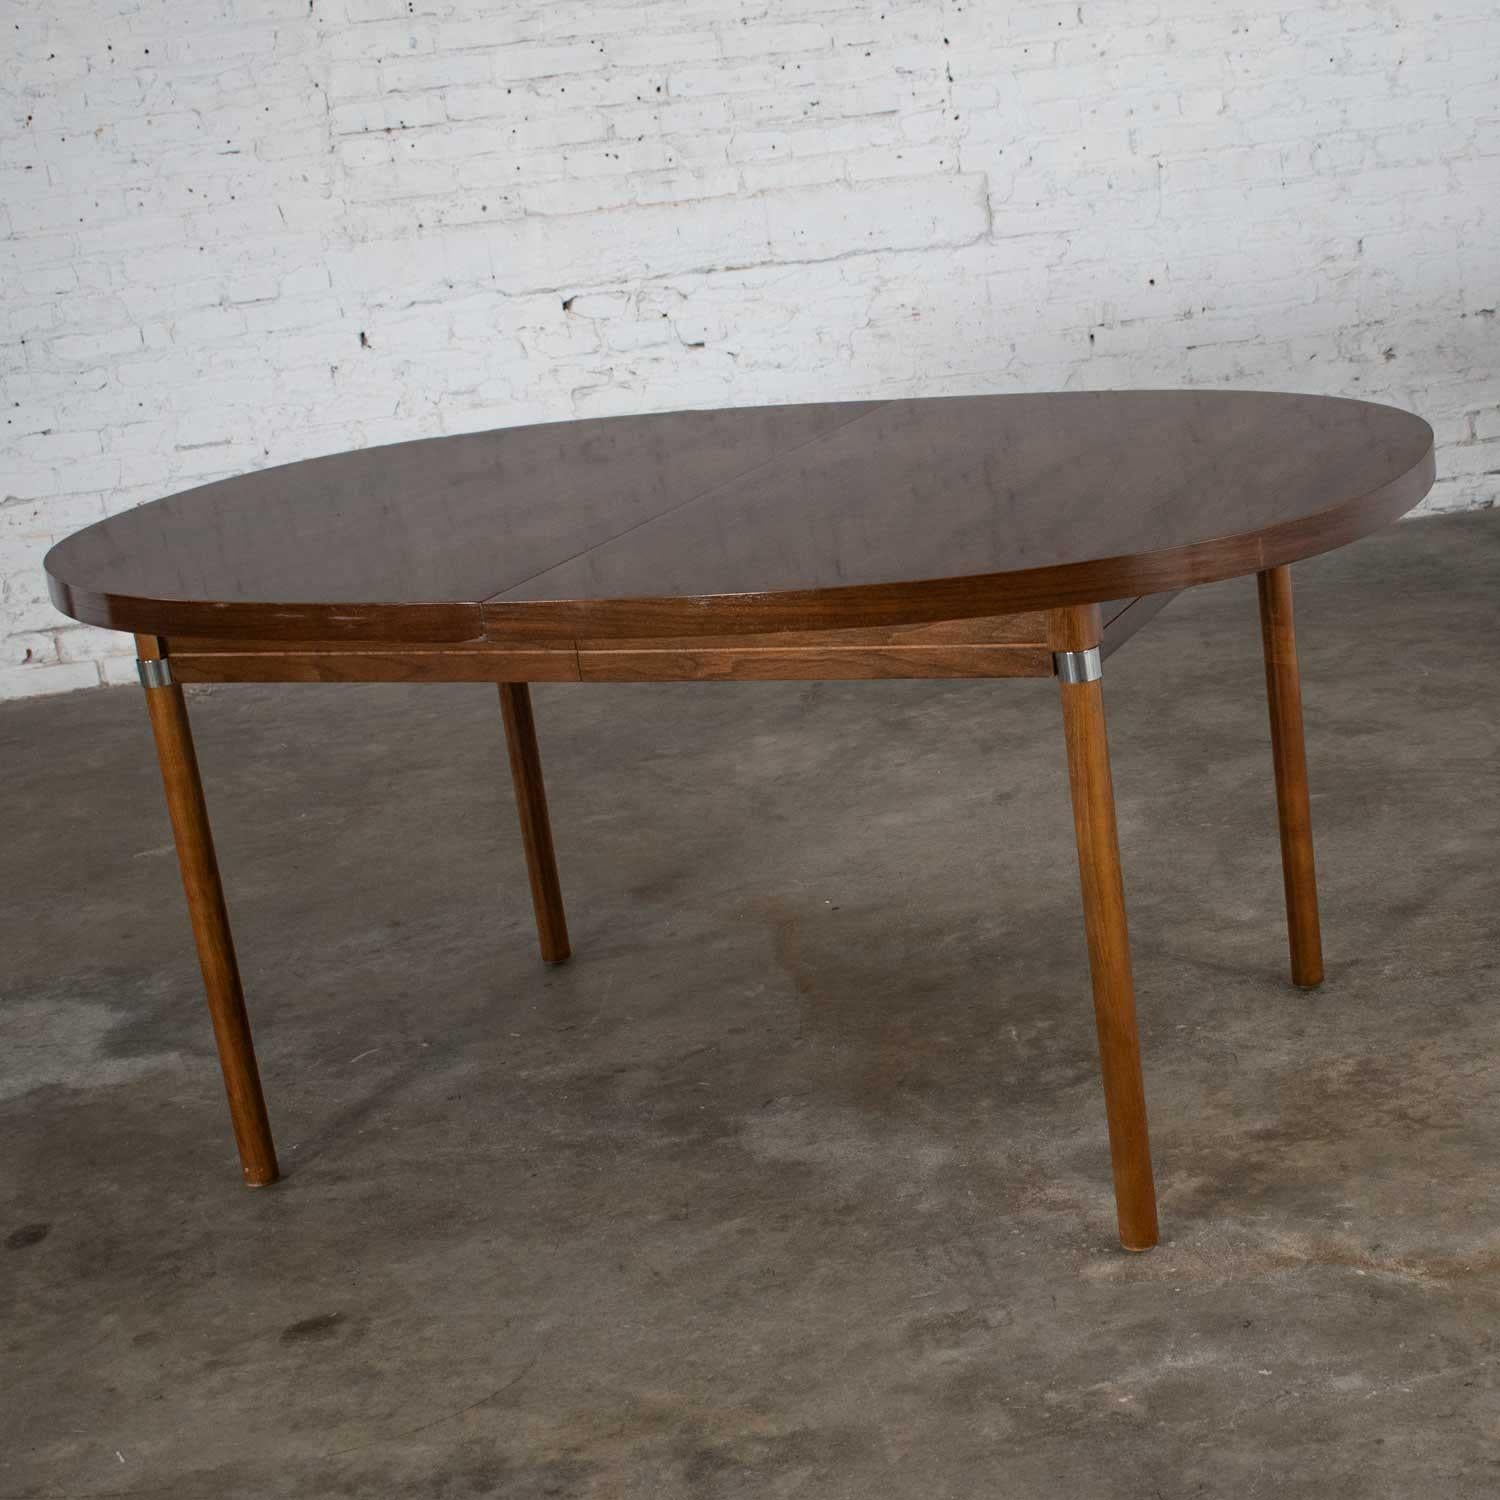 Beautiful oval Mid-Century Modern walnut toned expanding dining table with chrome accents, a wood grain laminate top, and one leaf. Wonderful vintage condition with a few minor touch ups as you would expect with wear and age. Please see photos.